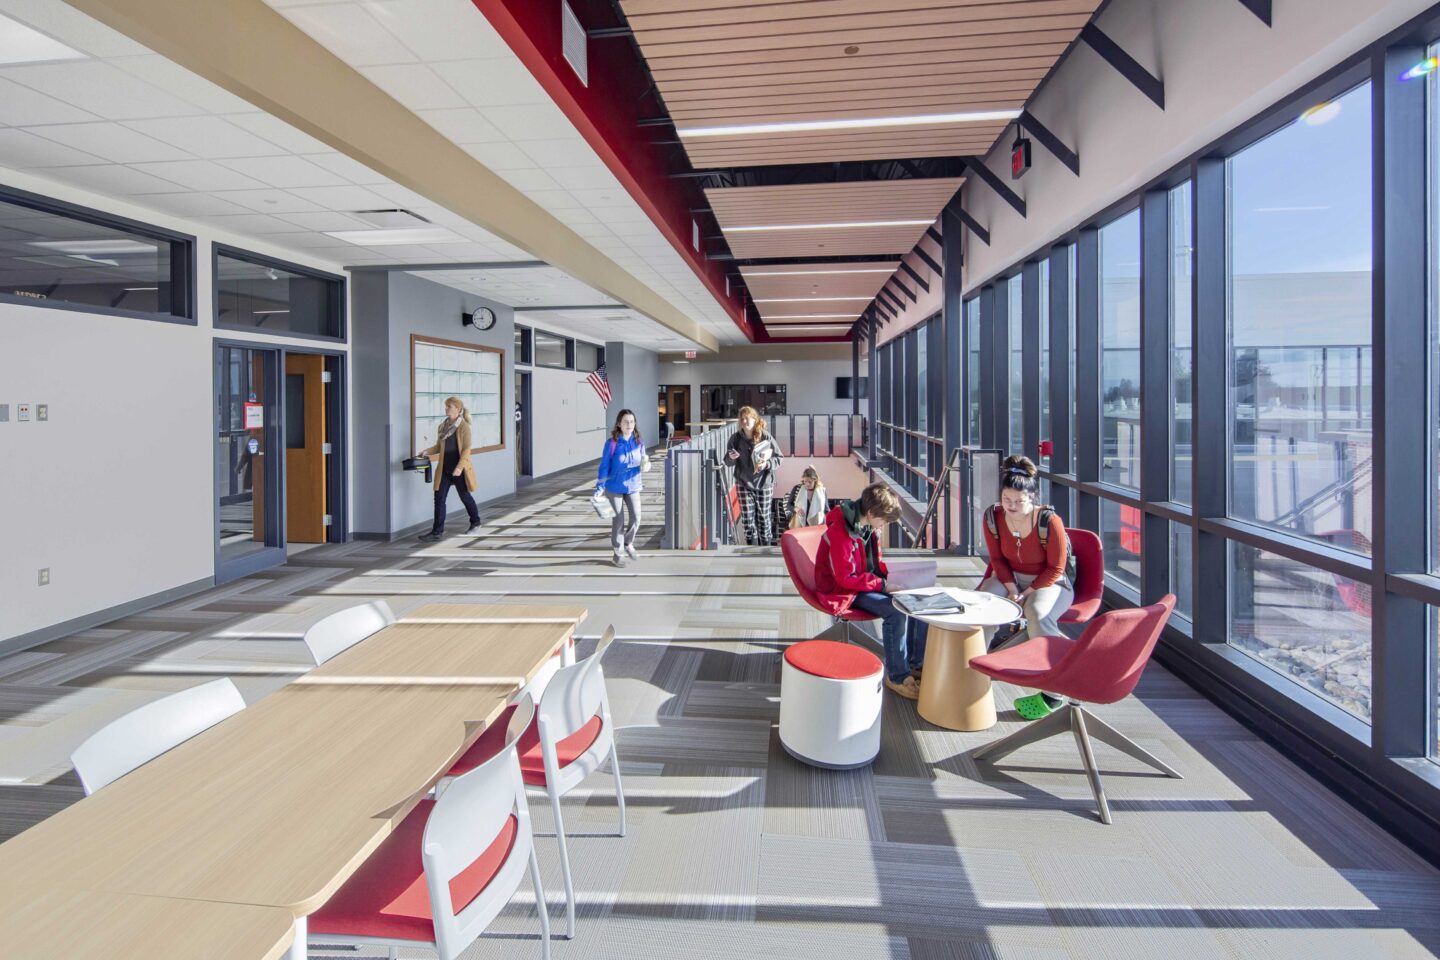 Students make use of the well-lit second floor landing area thanks to large, floor-to-ceiling windows along the adjacent corridor